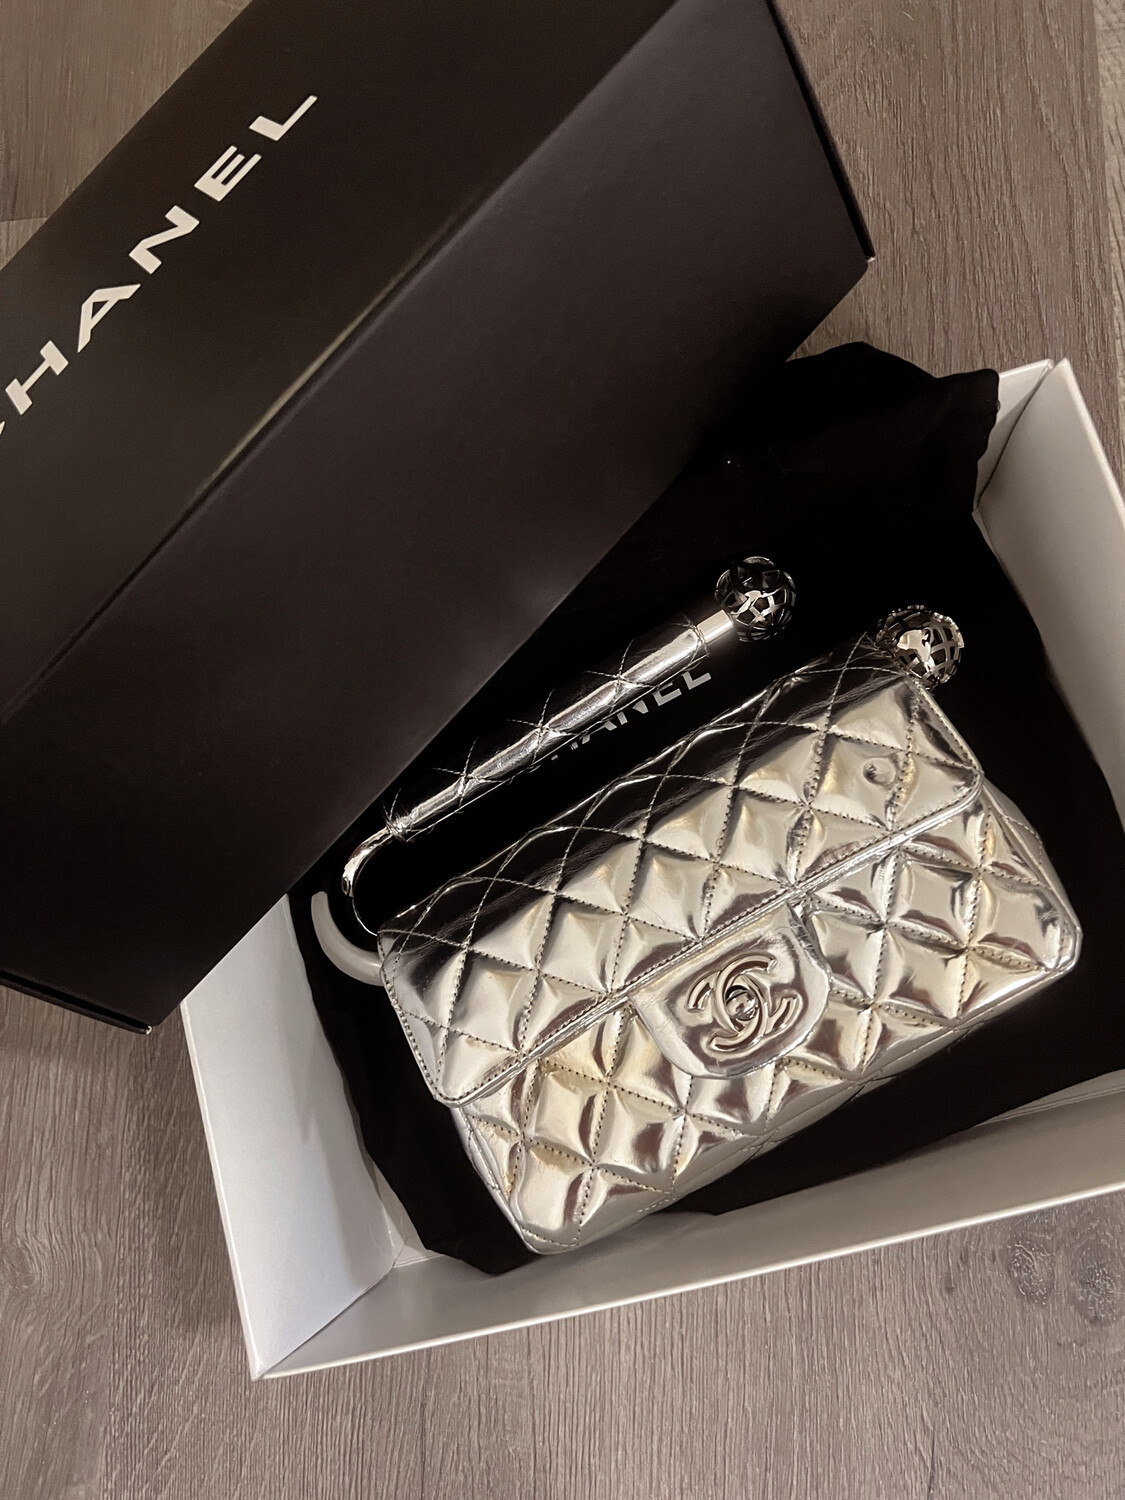 CHANEL AROUND THE WORLD SILVER LEATHER CLUTCH EVENING BAG